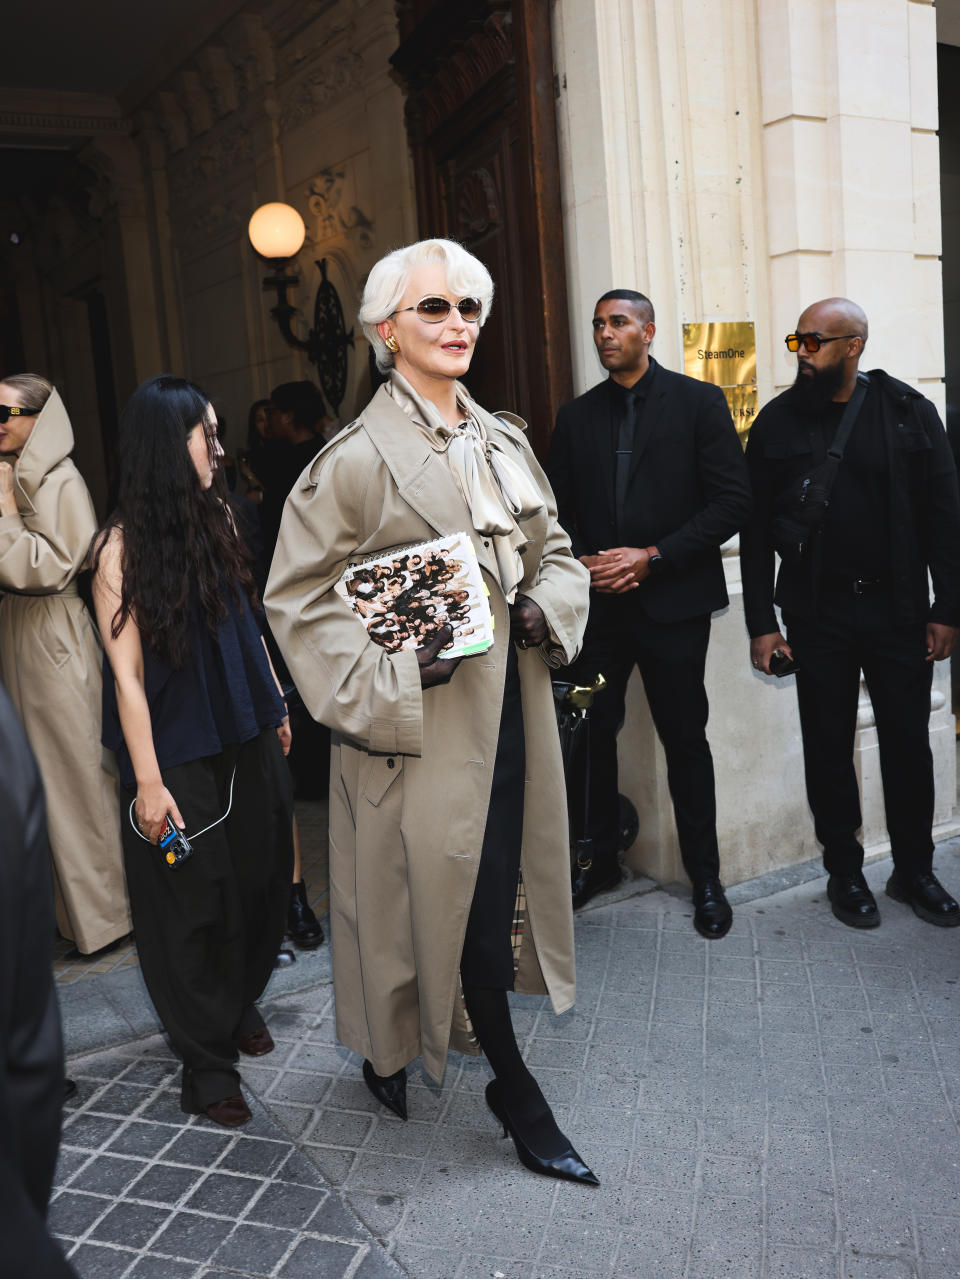 Alexis Stone walks confidently in a stylish trench coat, holding a fashion magazine. She is surrounded by security and staff